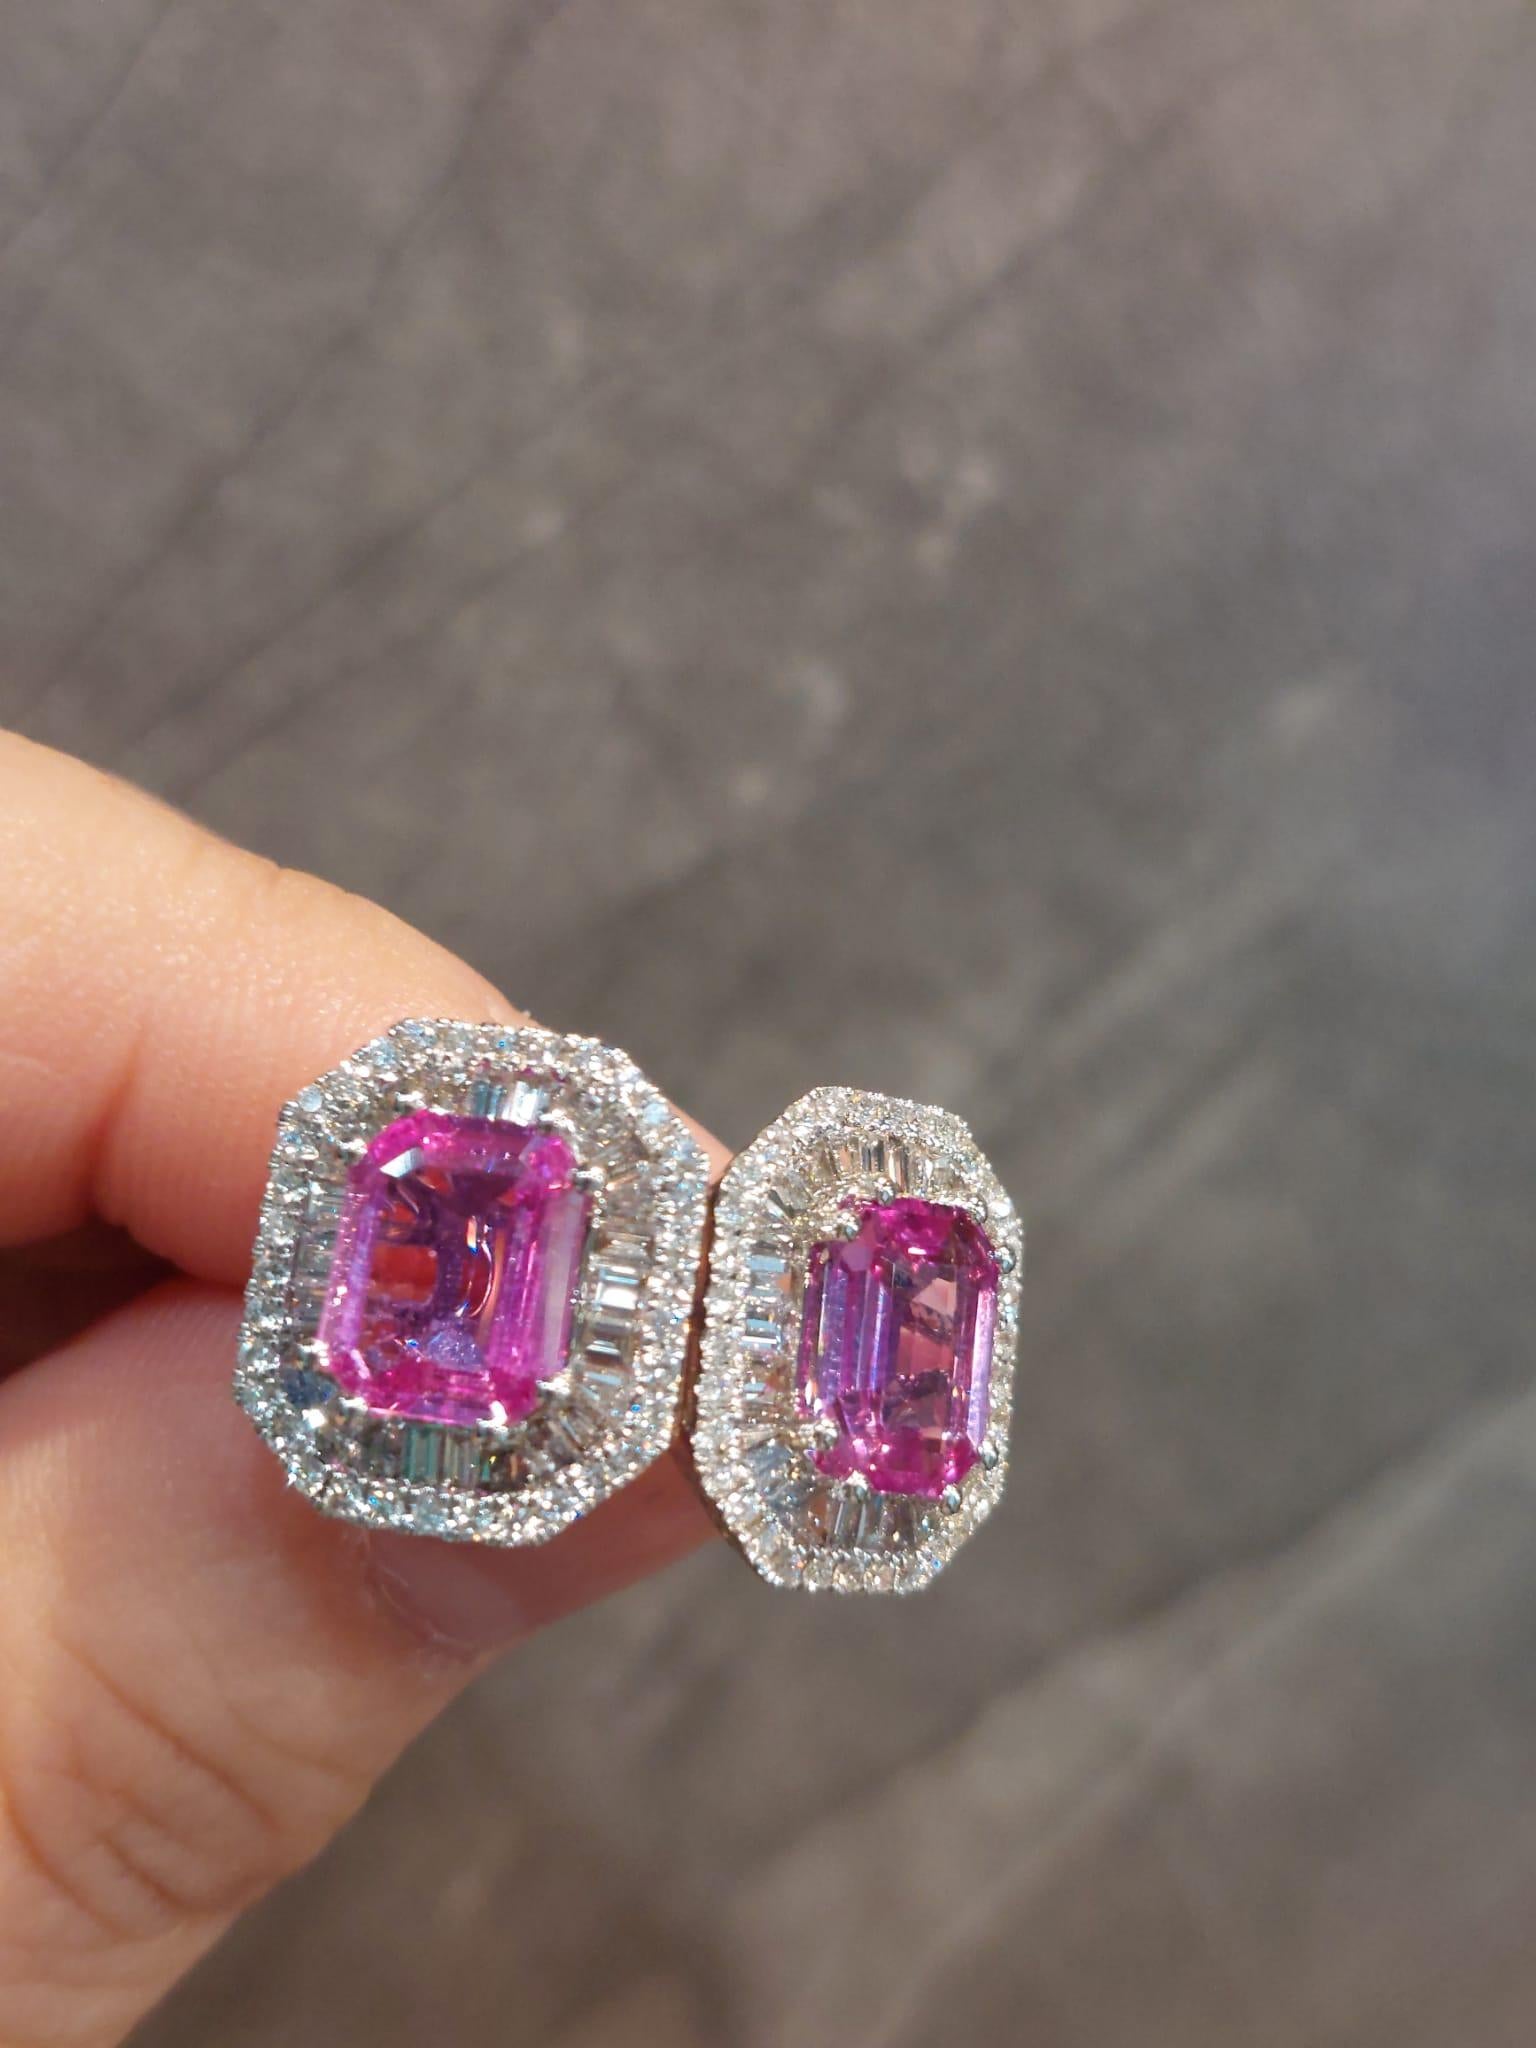 GILIN 18K White Gold Diamond Earring with Pink Sapphire For Sale 2